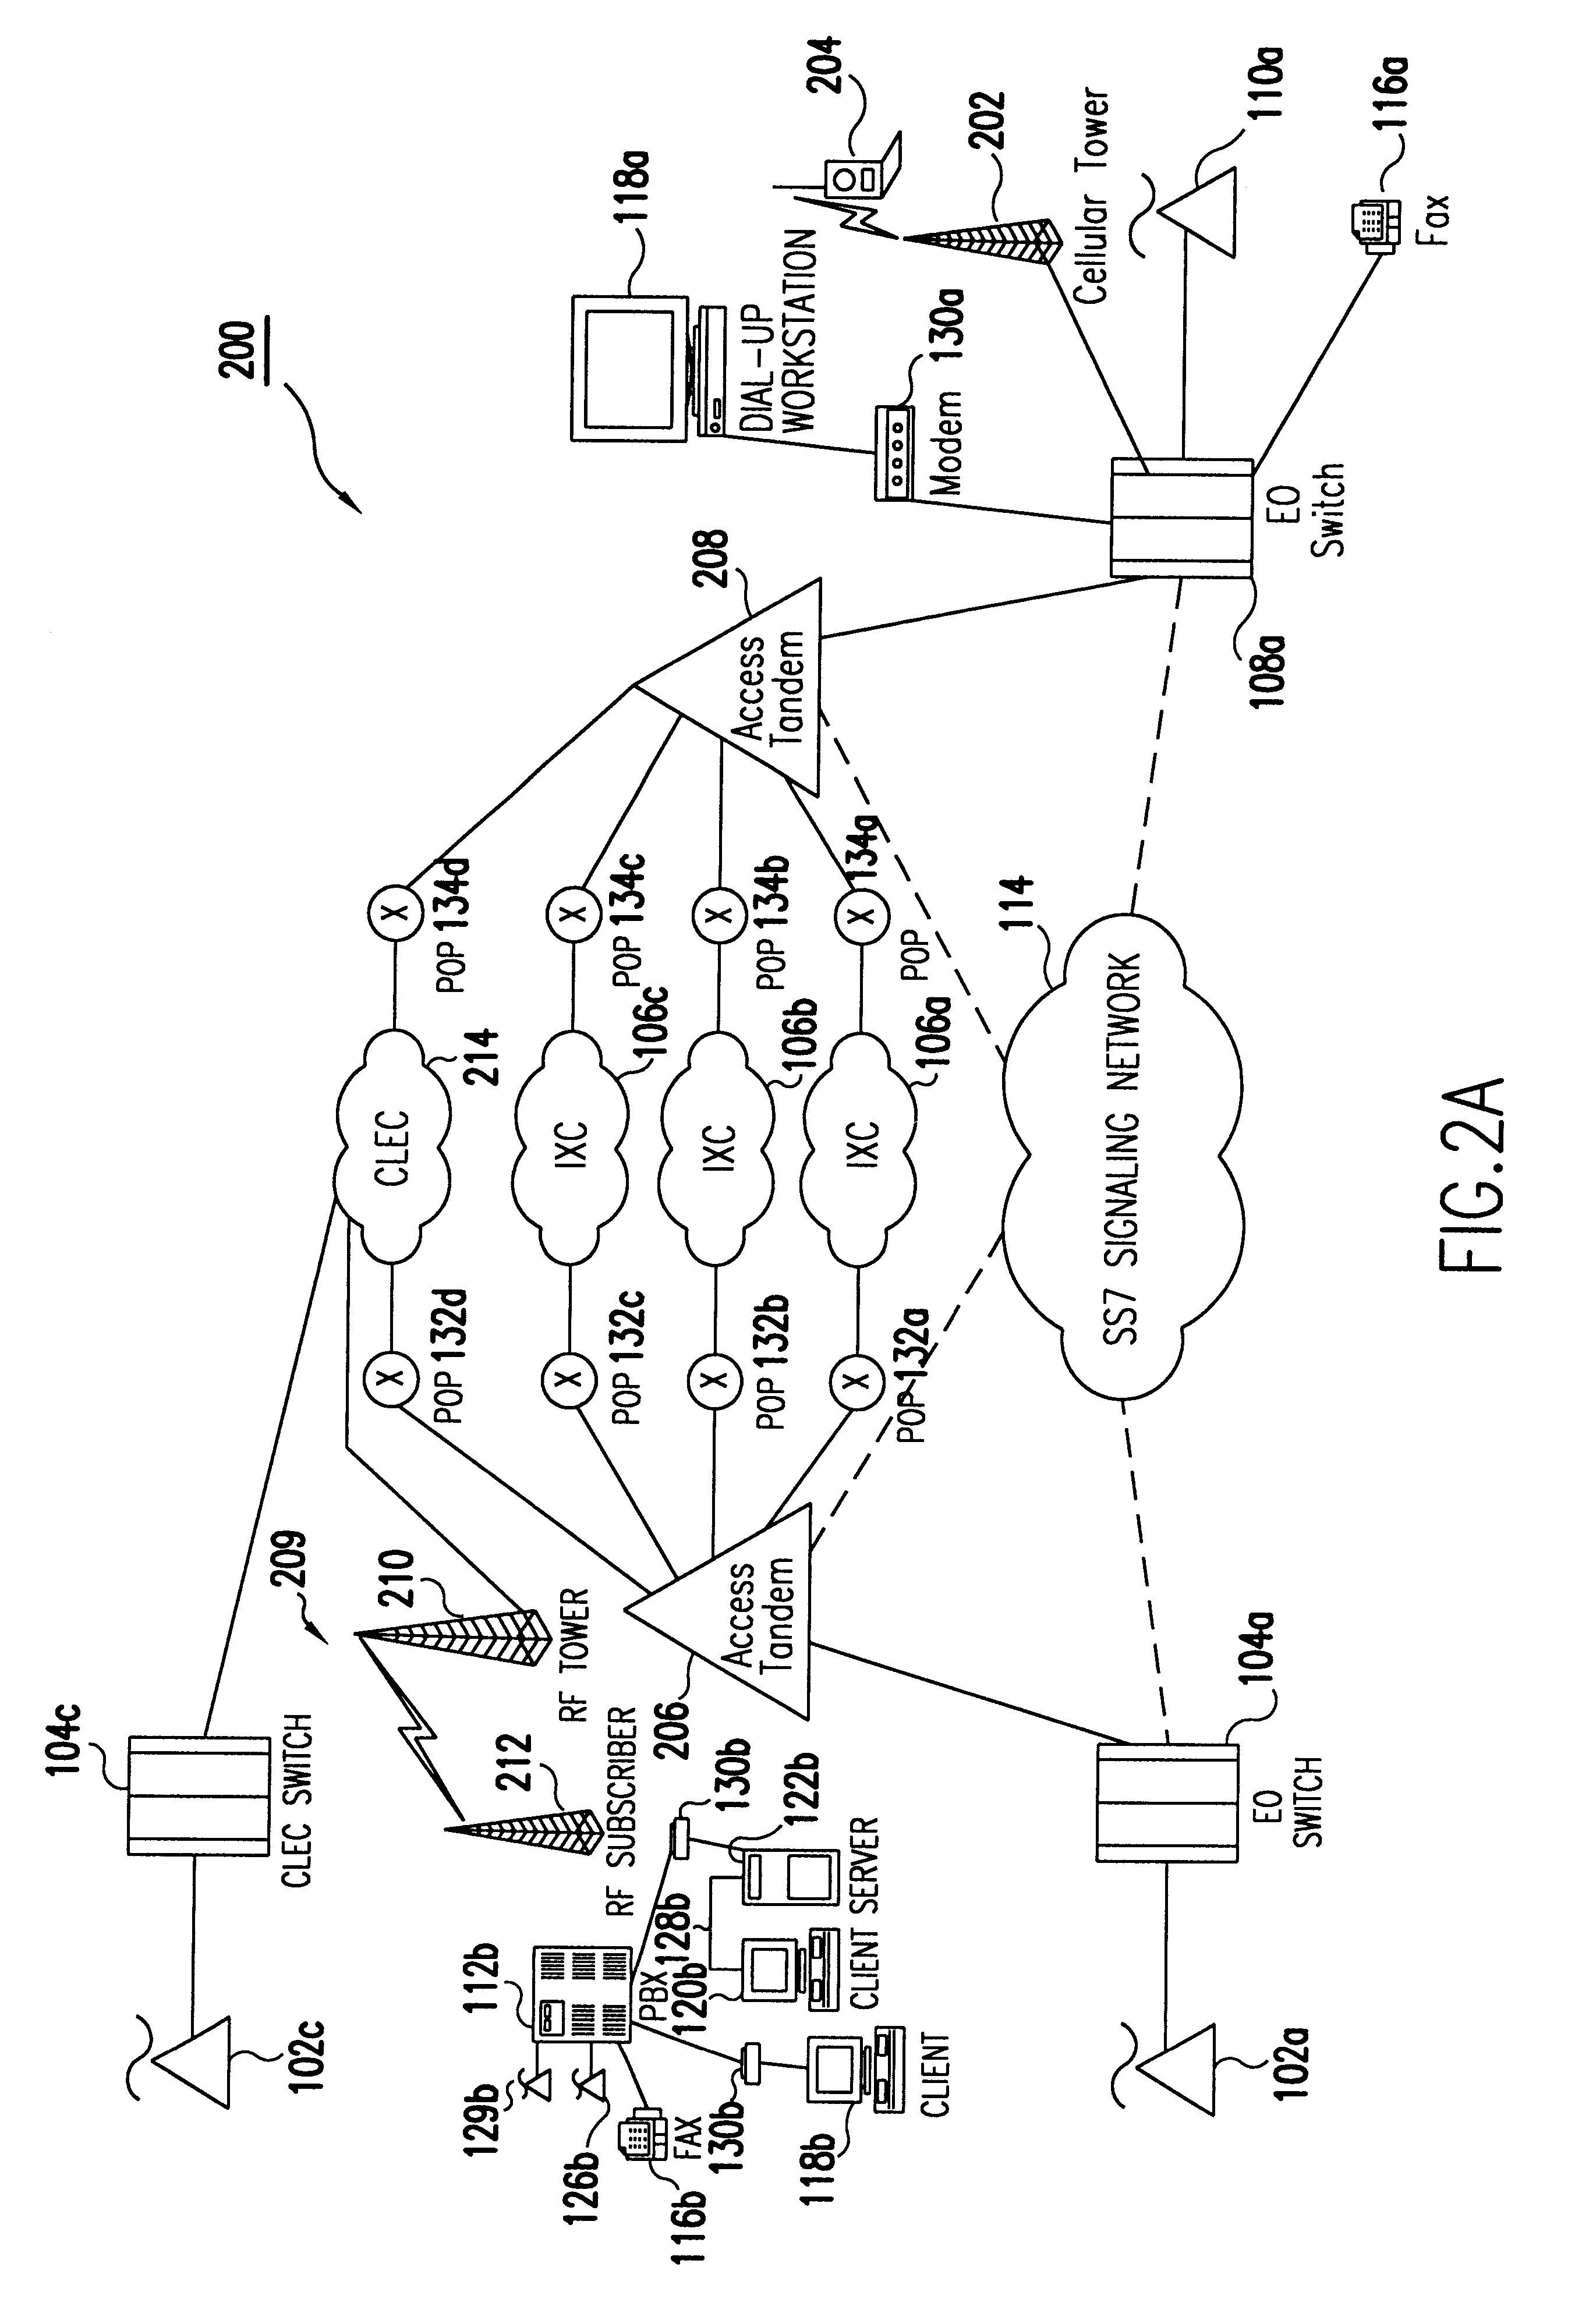 Transmission control protocol/internet protocol (TCP/IP) packet-centric wireless point to multi-point (PTMP) transmission system architecture